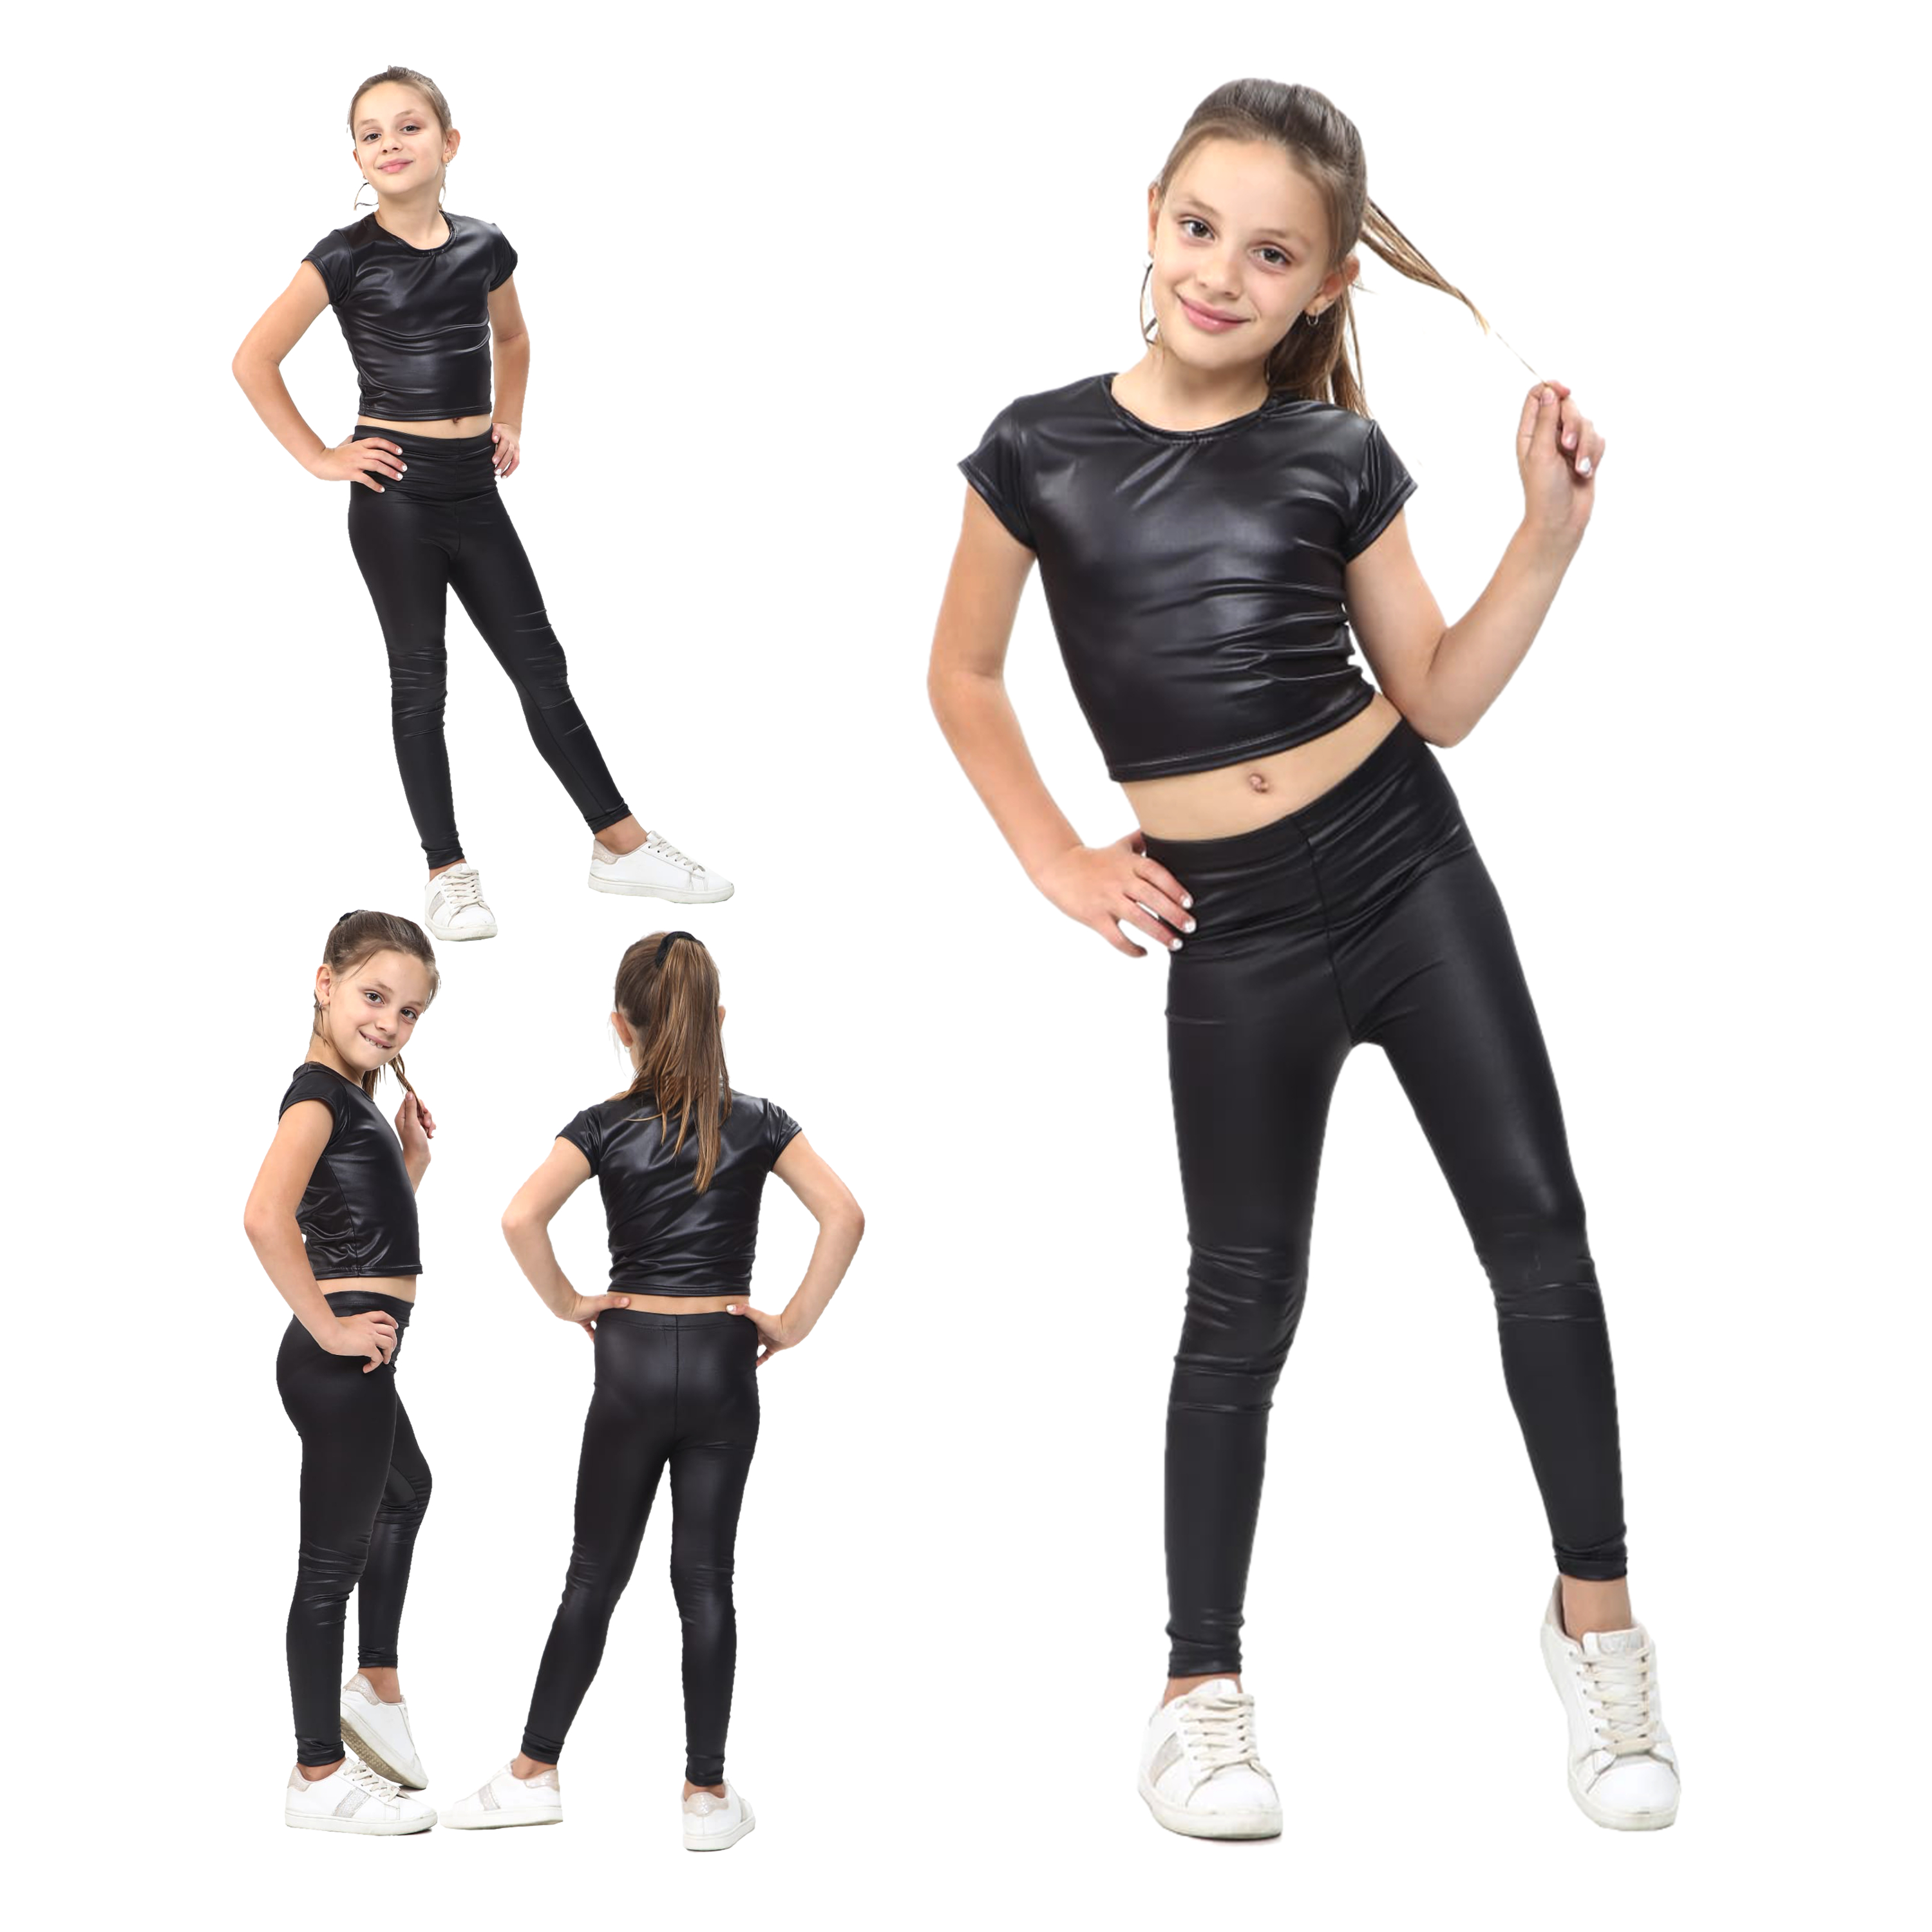 Girls Wet Look Outfit Crop Top and Leggings New Metallic Black Shiny ...